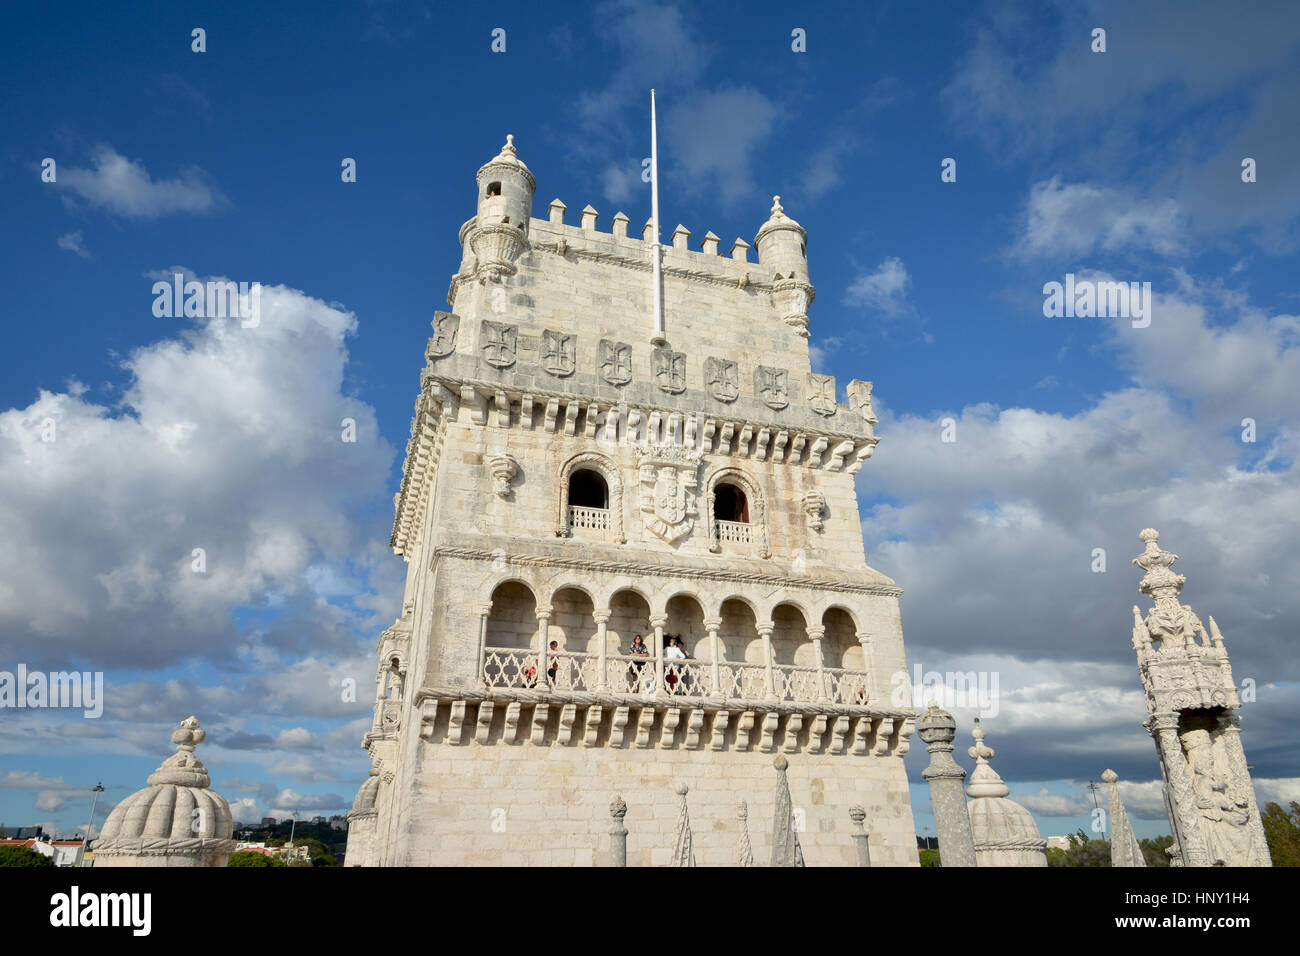 Tourists visit the famous Belem Tower near Lisbon, a prominent example of 16th century Manueline style in Portugal Stock Photo